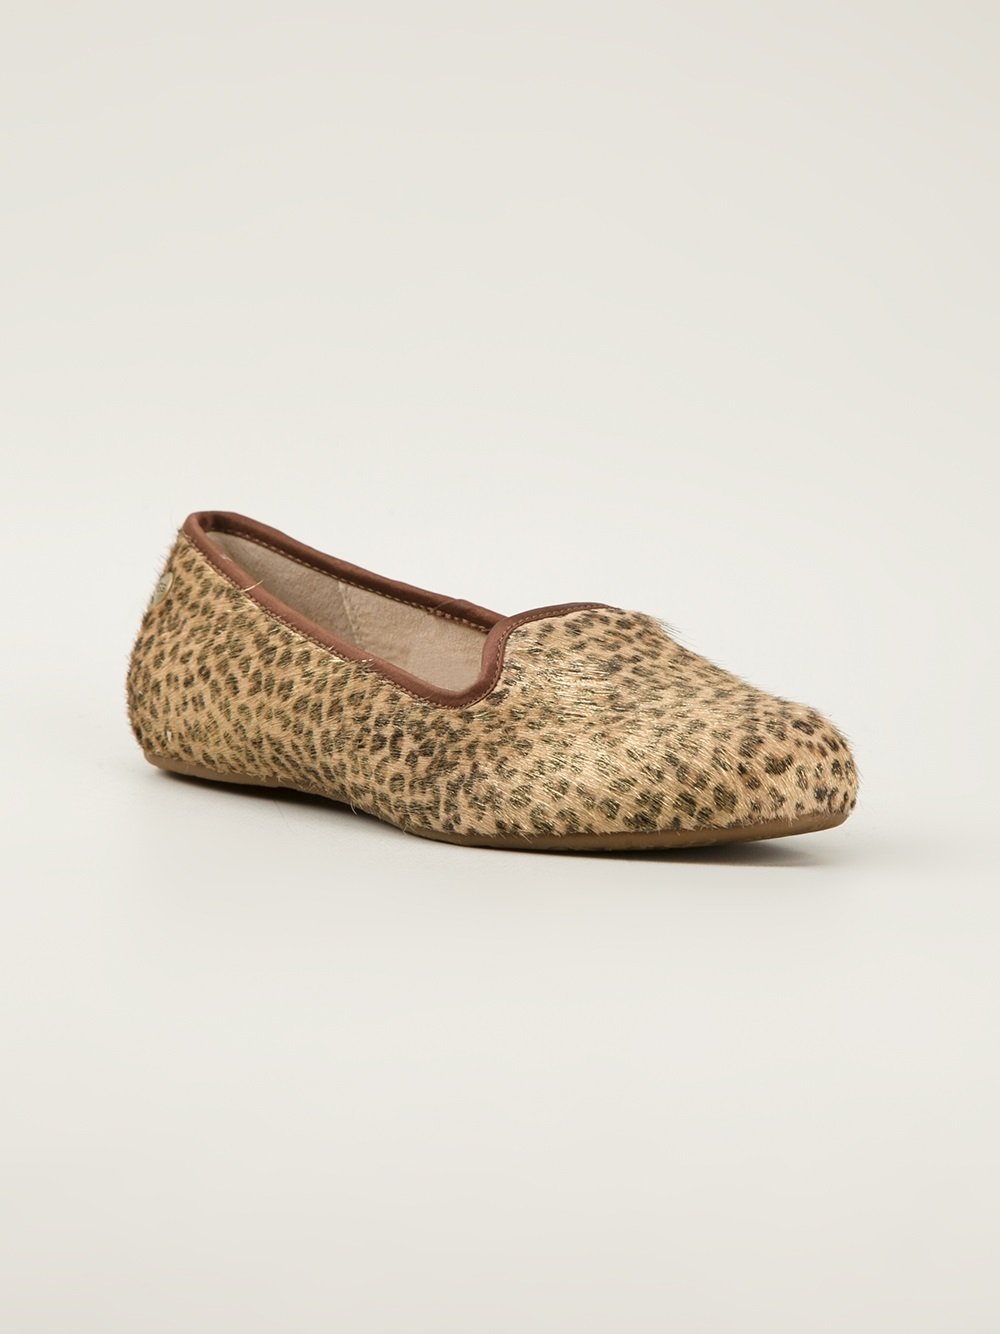 Ugg Leopard Print Slippers in Animal (brown) | Lyst